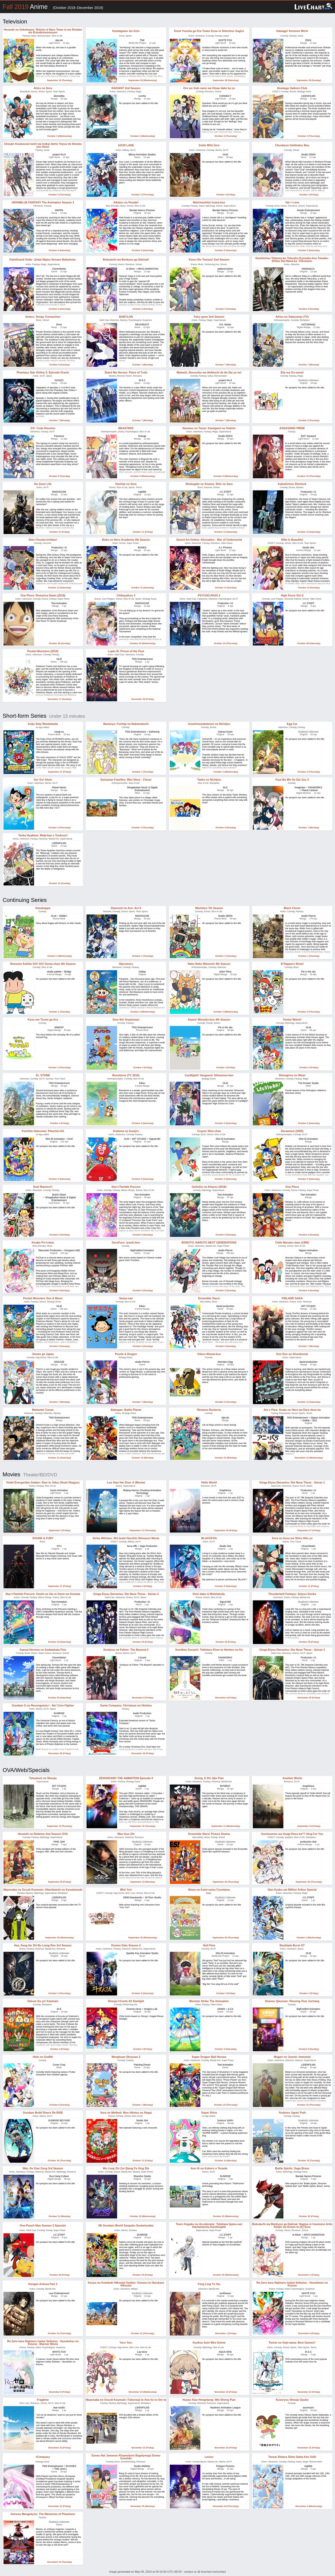 Fall 2019 Anime Chart - Television | LiveChart.me